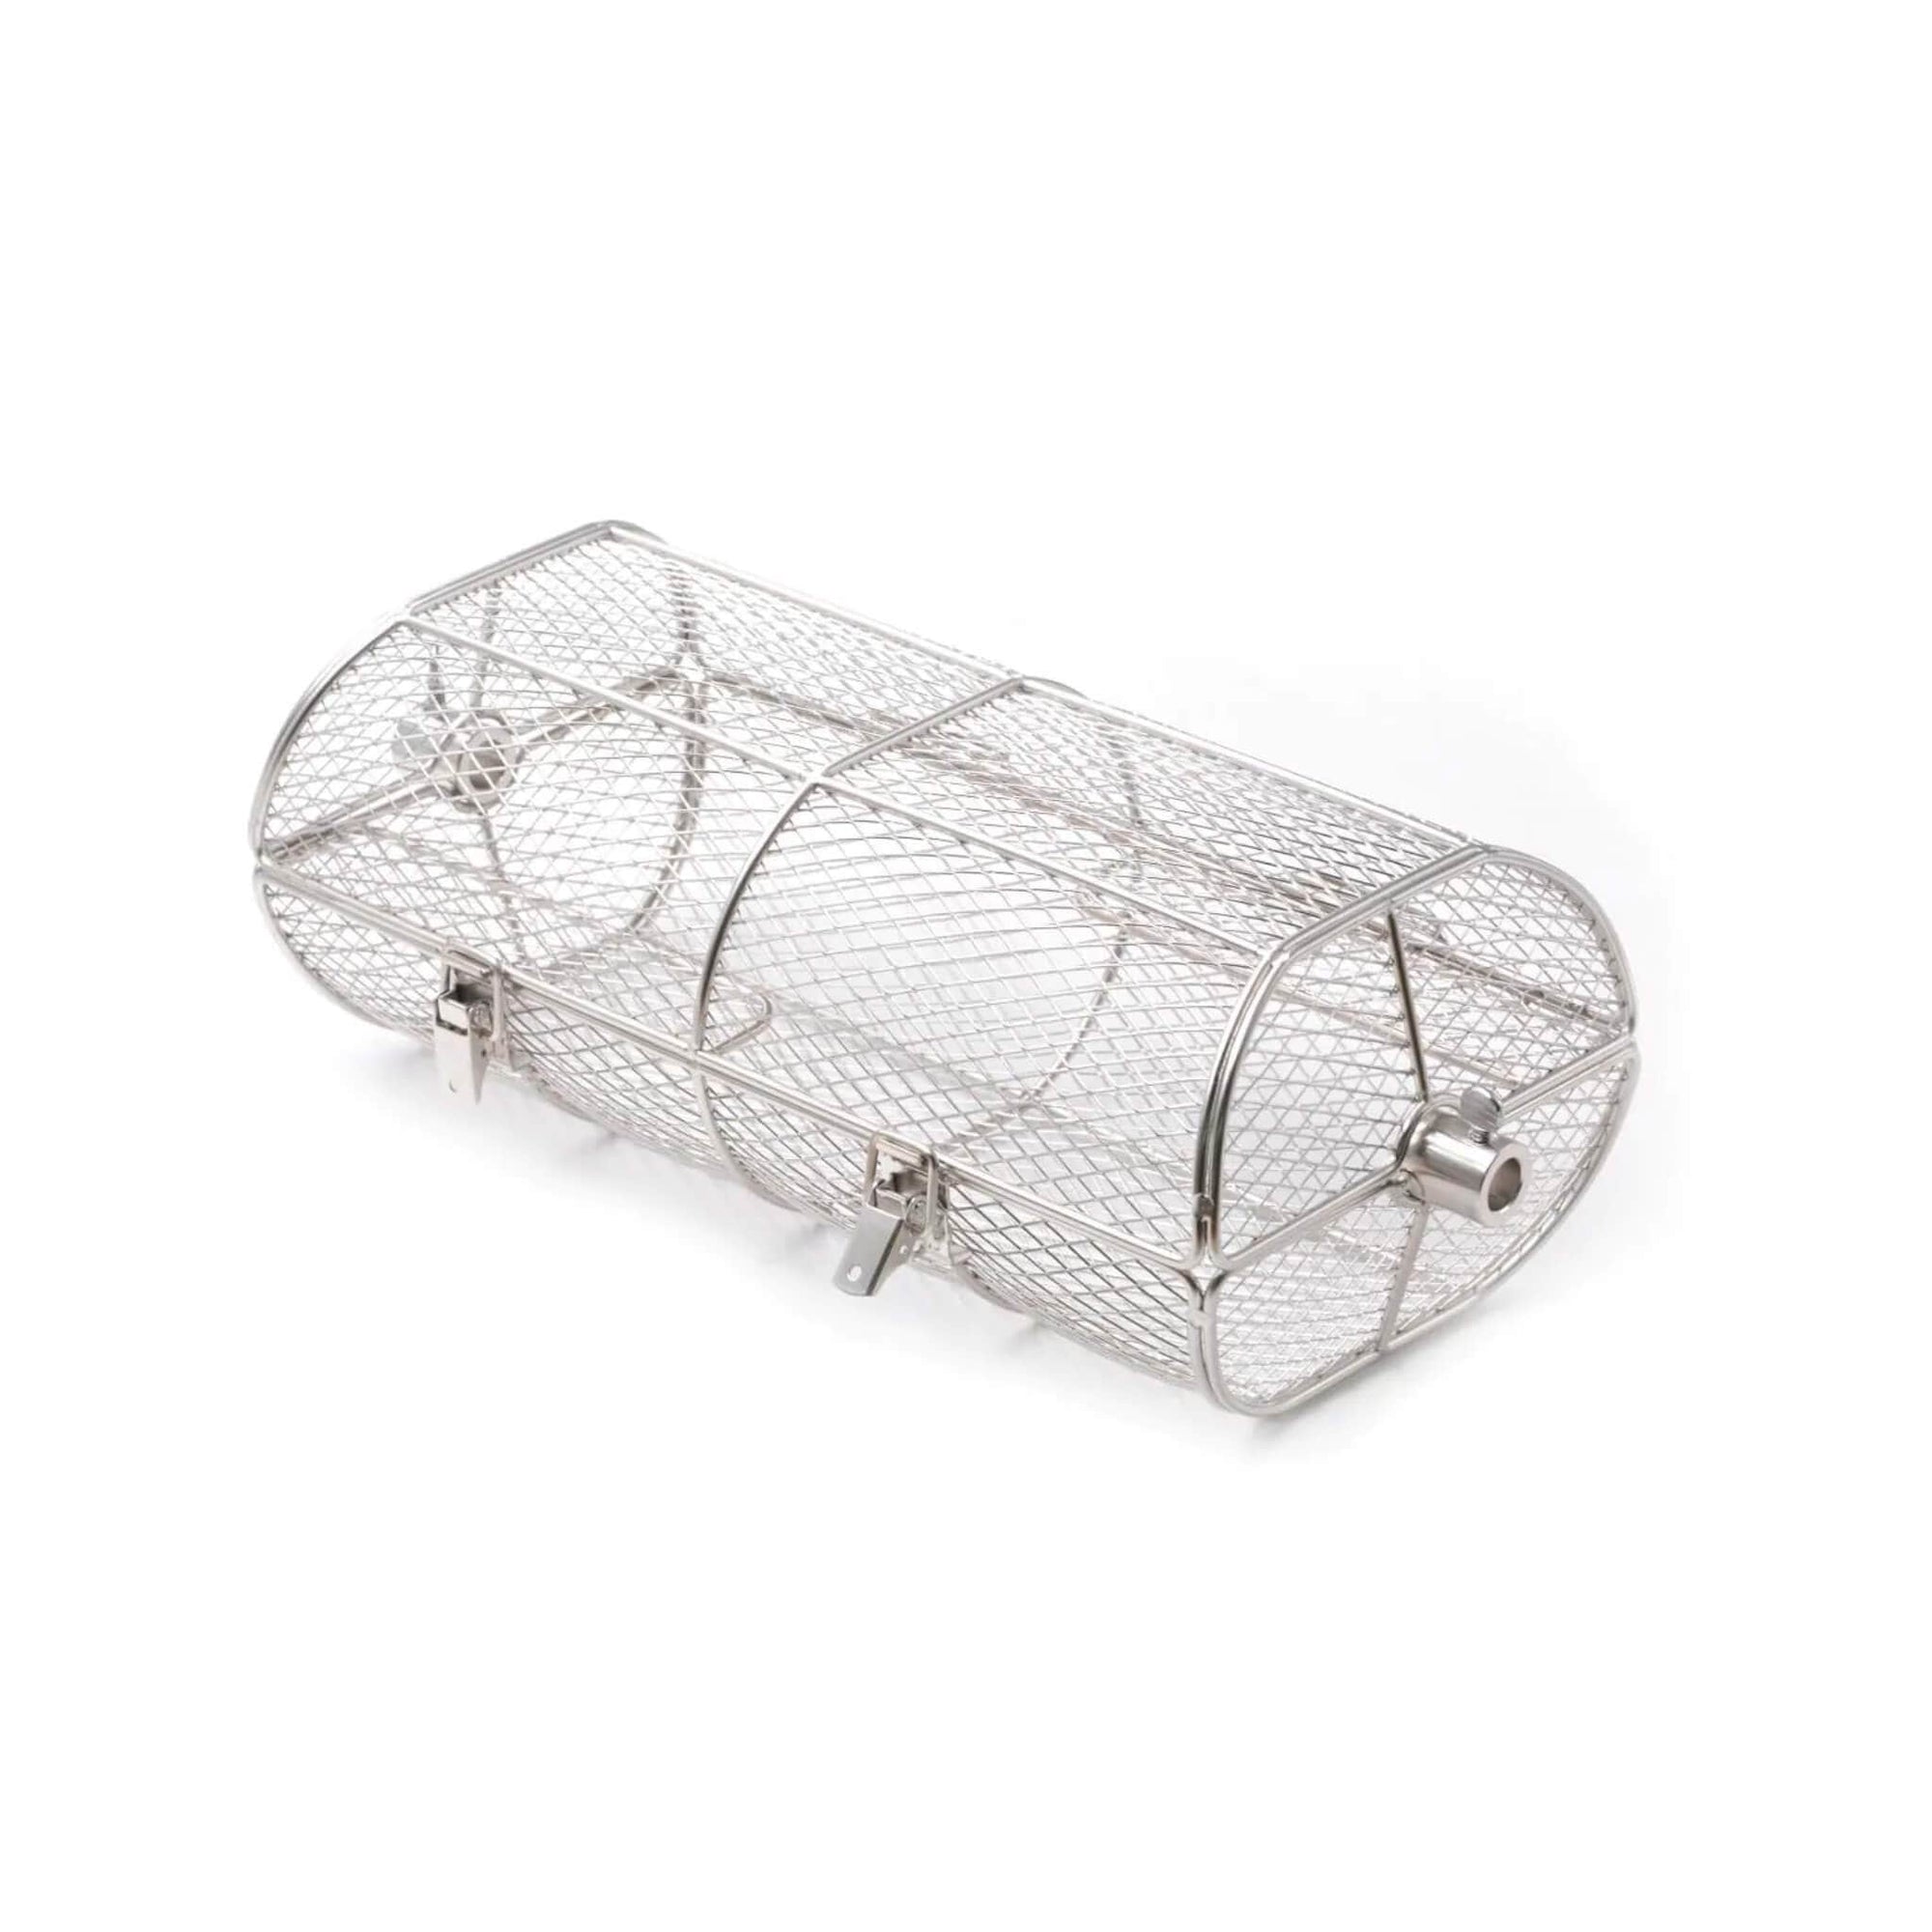 Primo Grill Rotisserie Basket - Culinary Hardware